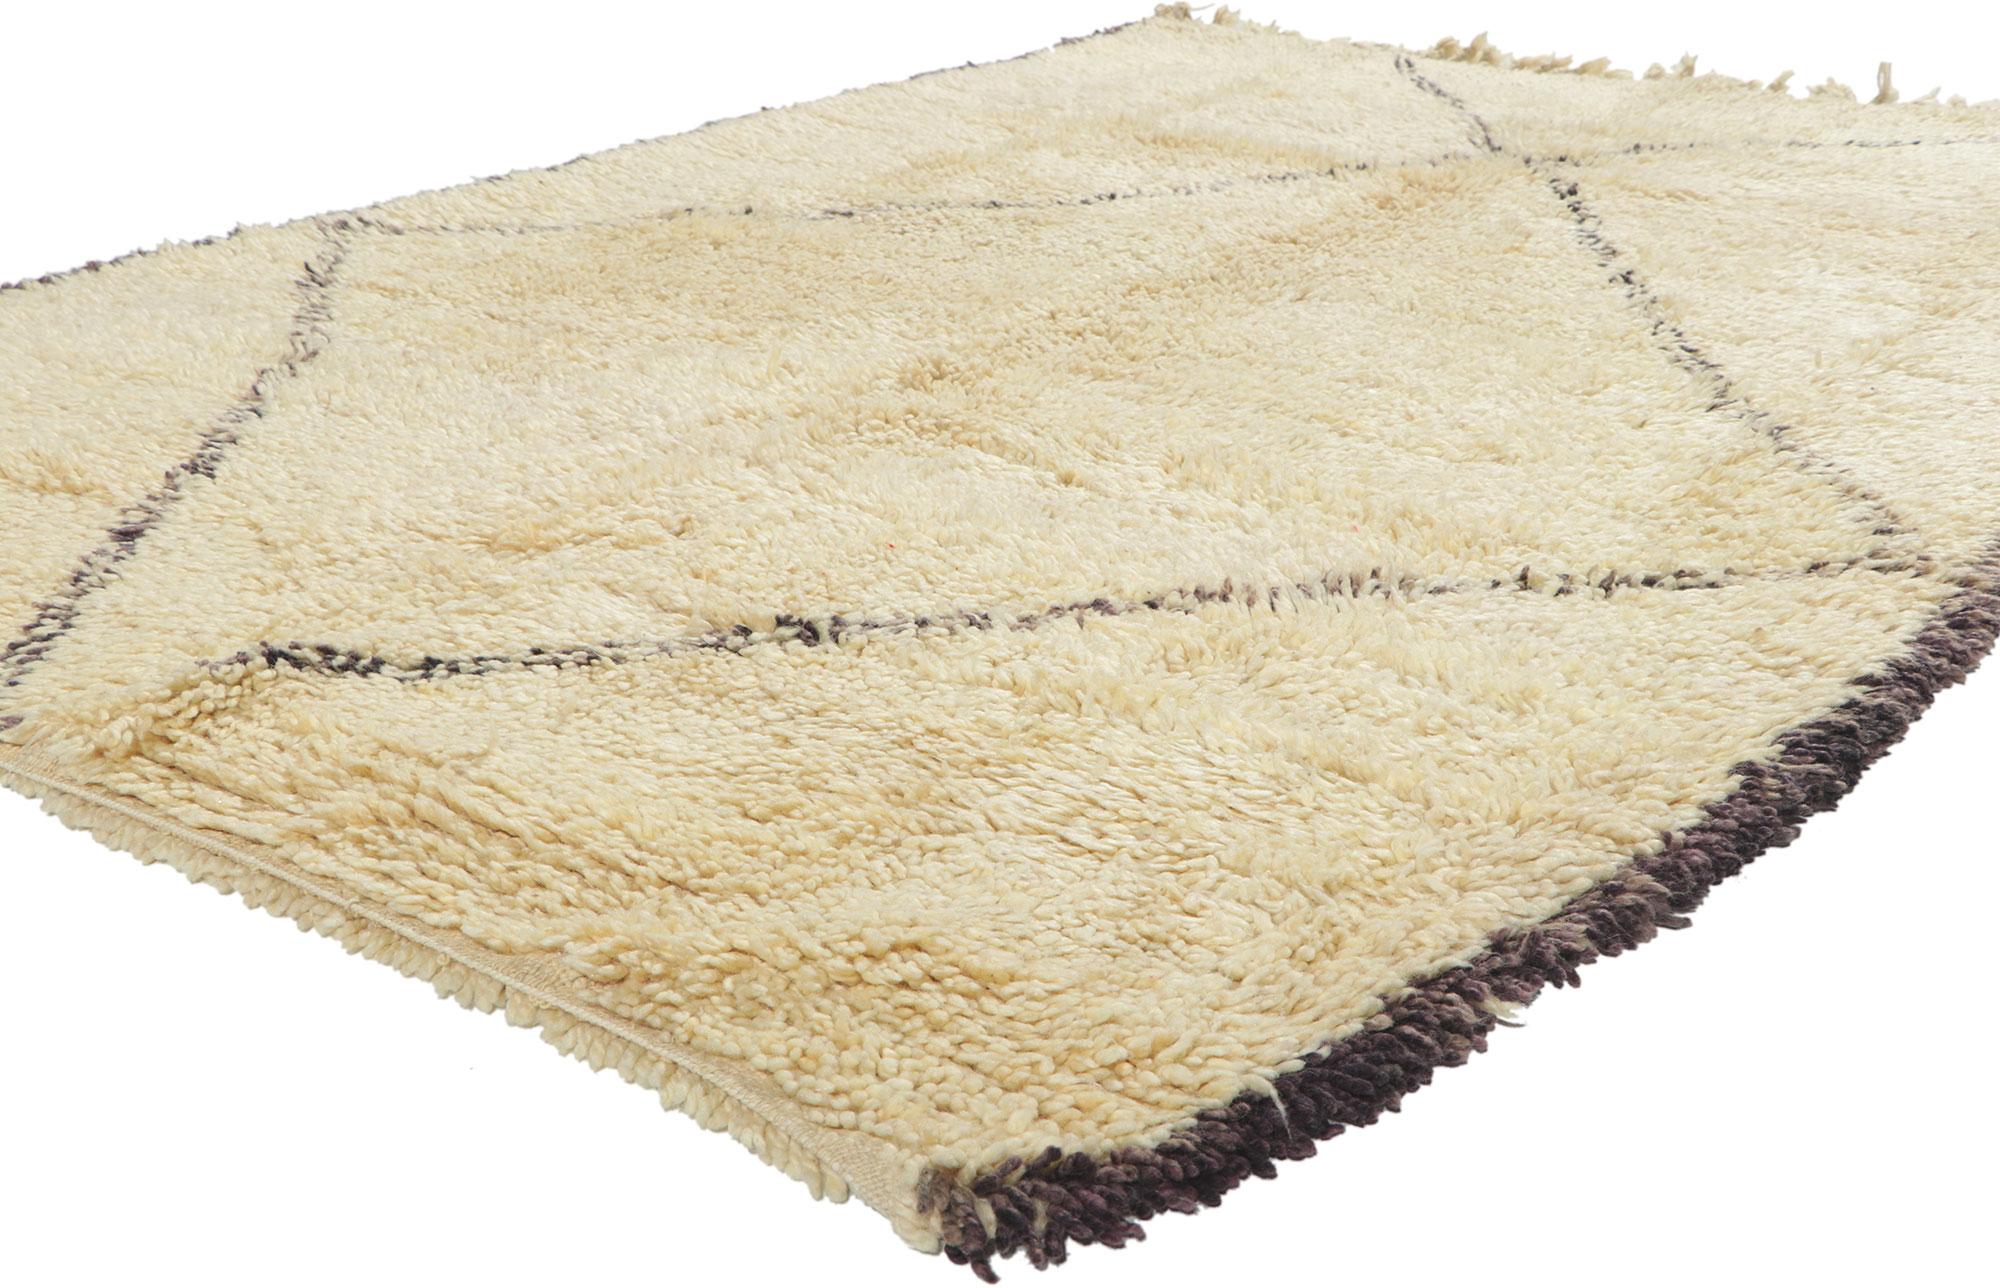 78398 Vintage Moroccan Beni Ourain Rug 05'02 x 07'11. With its simplicity, plush pile, incredible detail and texture, this hand knotted wool vintage Beni Ourain Moroccan rug is a captivating vision of woven beauty. It features a single diamond with